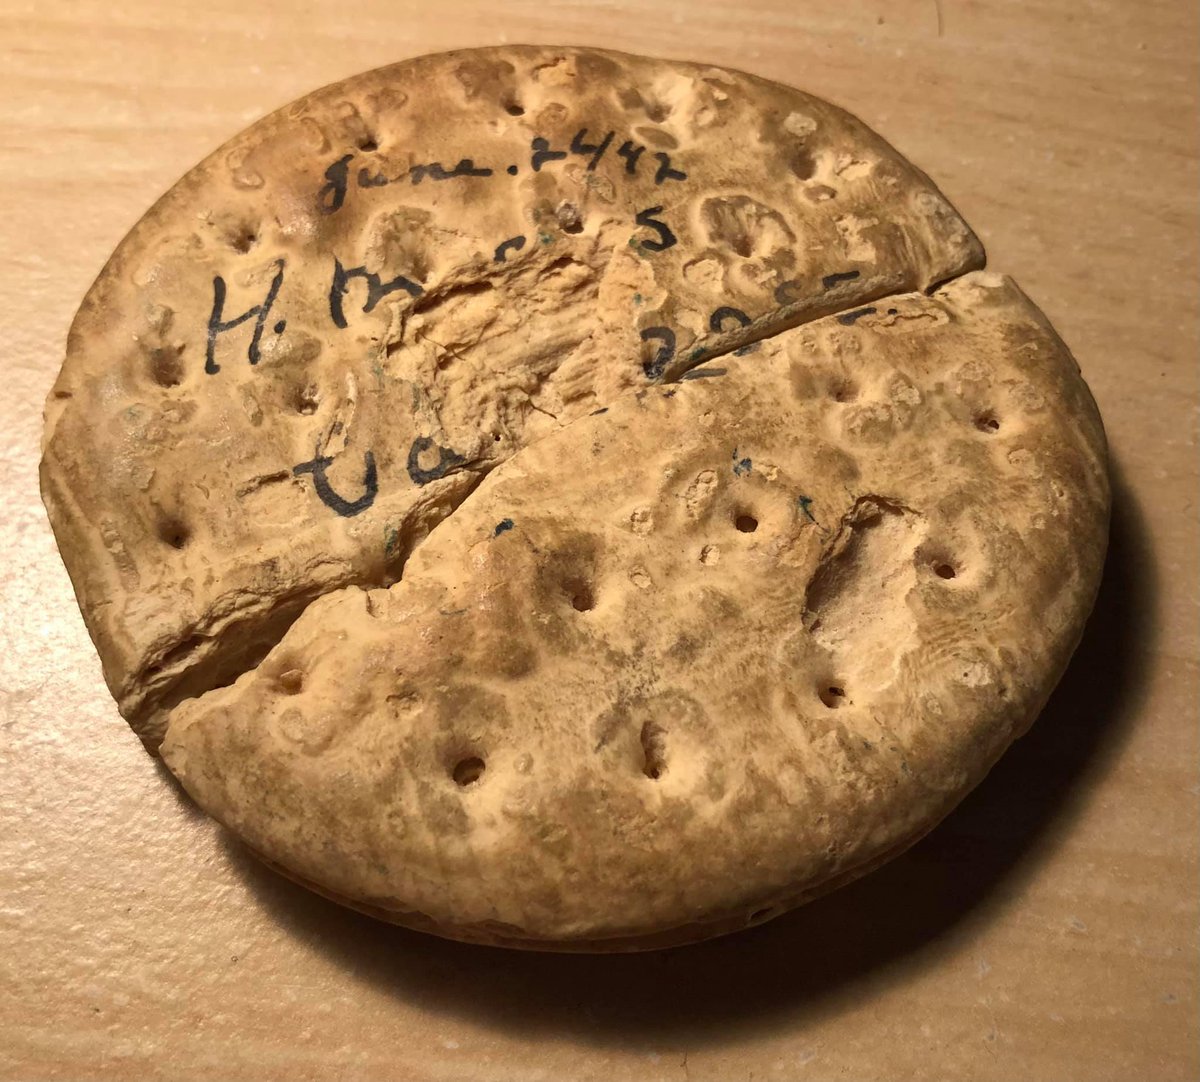 But here's my favorite piece... a biscuit. From what I've read, sailors would be given super dry crackers. They lasted forever. On one side, it seems to say June 26, 1942... HMCS Camrose. But it's the other side I love...